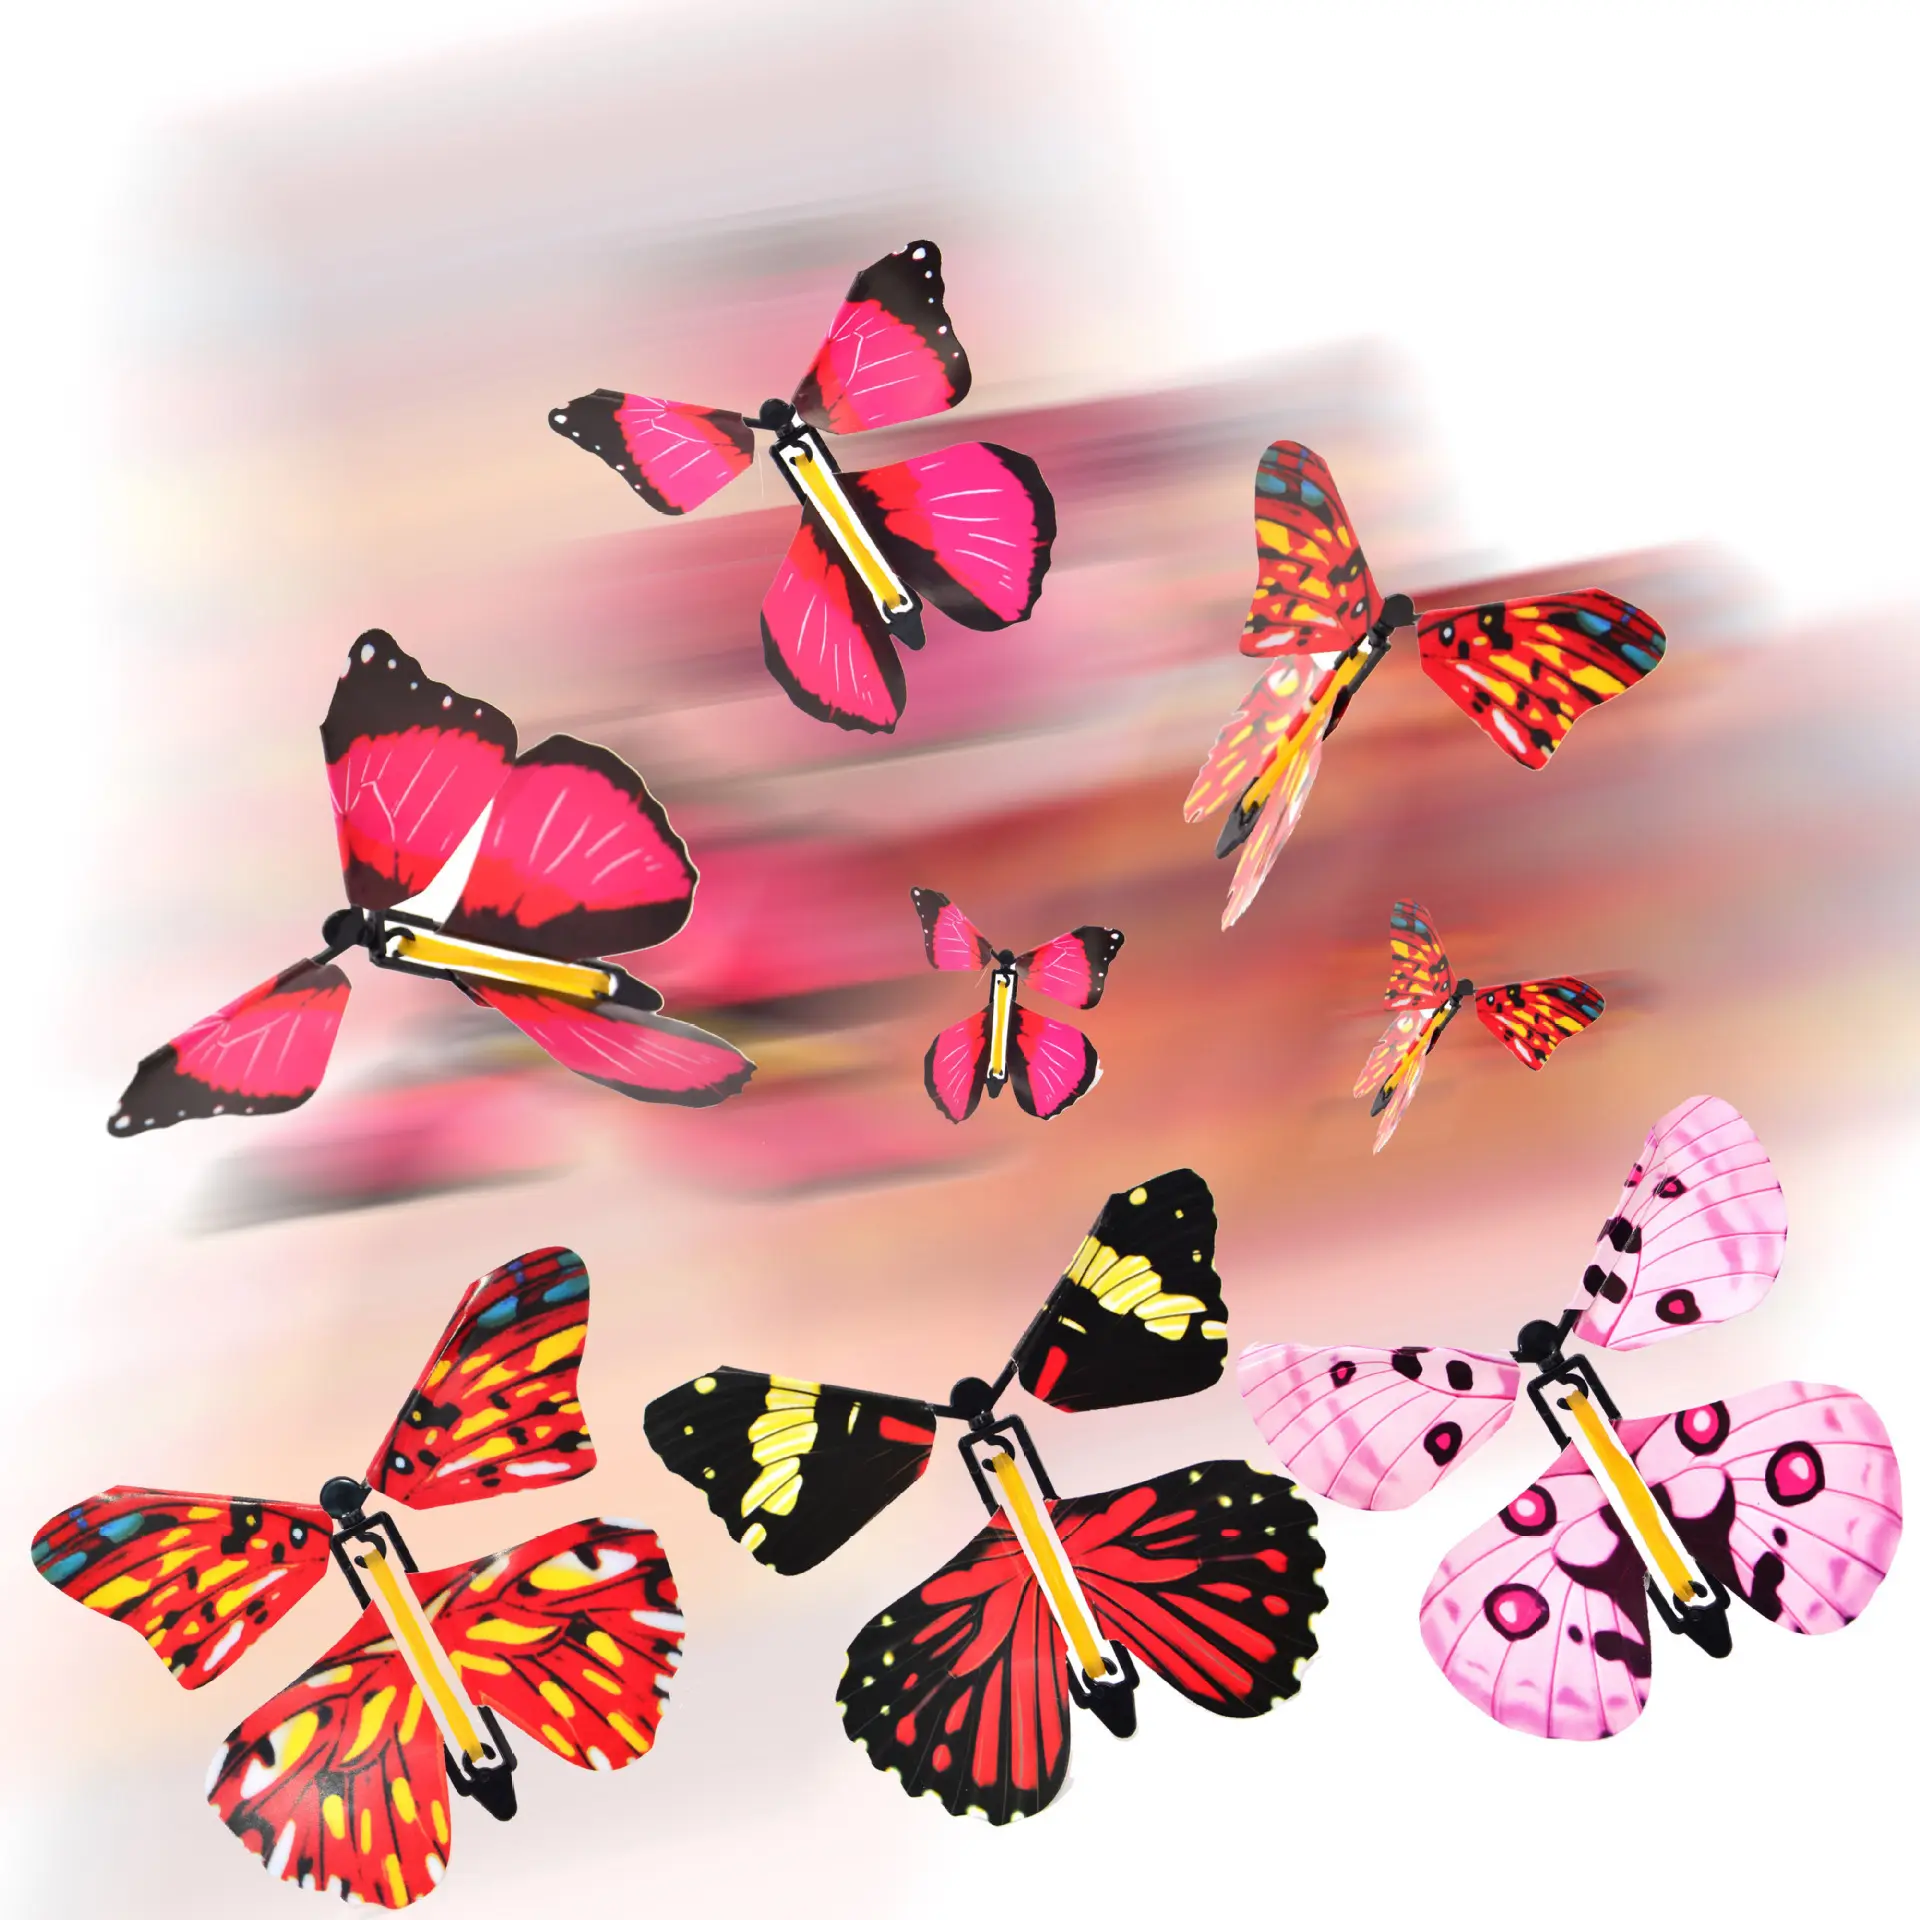 Hot selling Mystical Fun magic flying butterfly Powered Wind up elastic Band Butterfly for Wedding birthday Great Surprise Gift